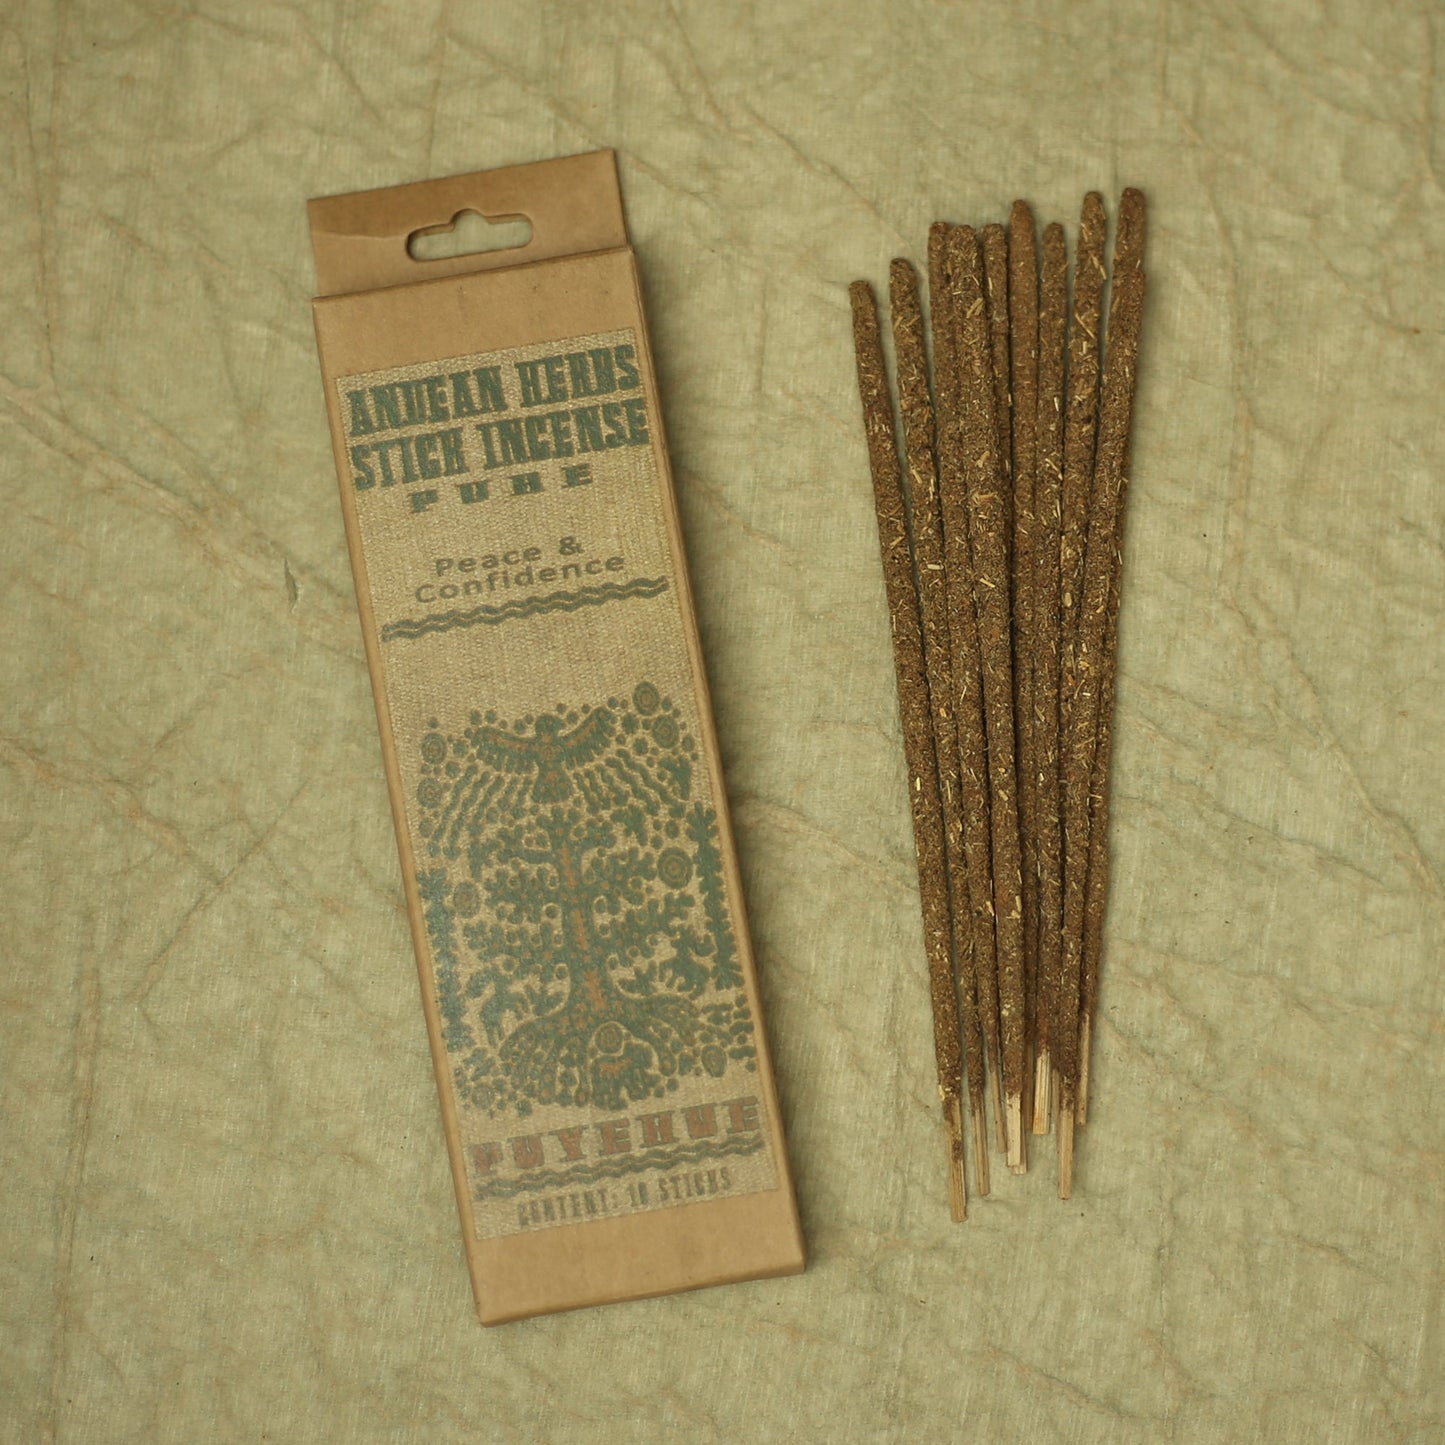 Smudging Incense - Pure - Andean Herbs Incense Sticks - Peace & Confidence - Tree Spirit Wellness